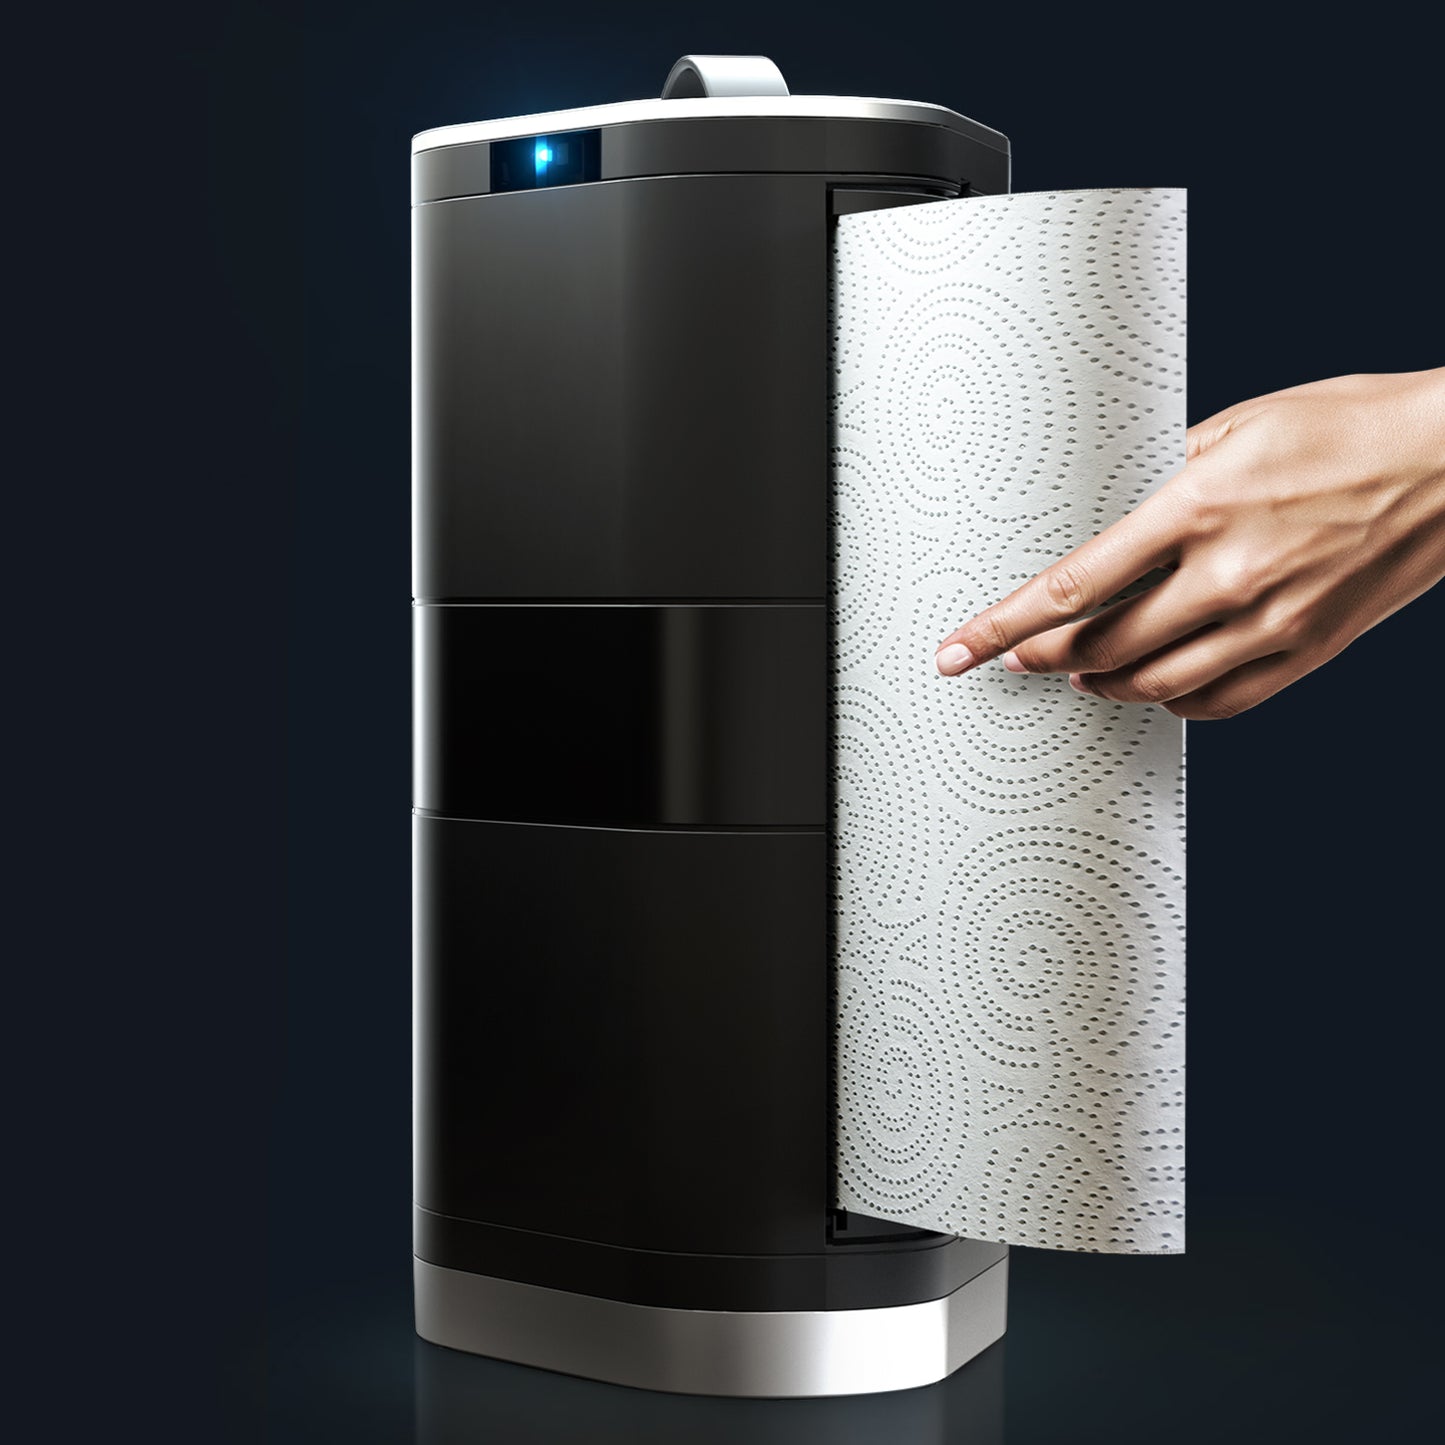 Innovia Automatic Paper Towel Dispenser. Touchless Technology. Works with Most Paper Towel Brands and Sizes. Dispenses The Number of Sheets You Need